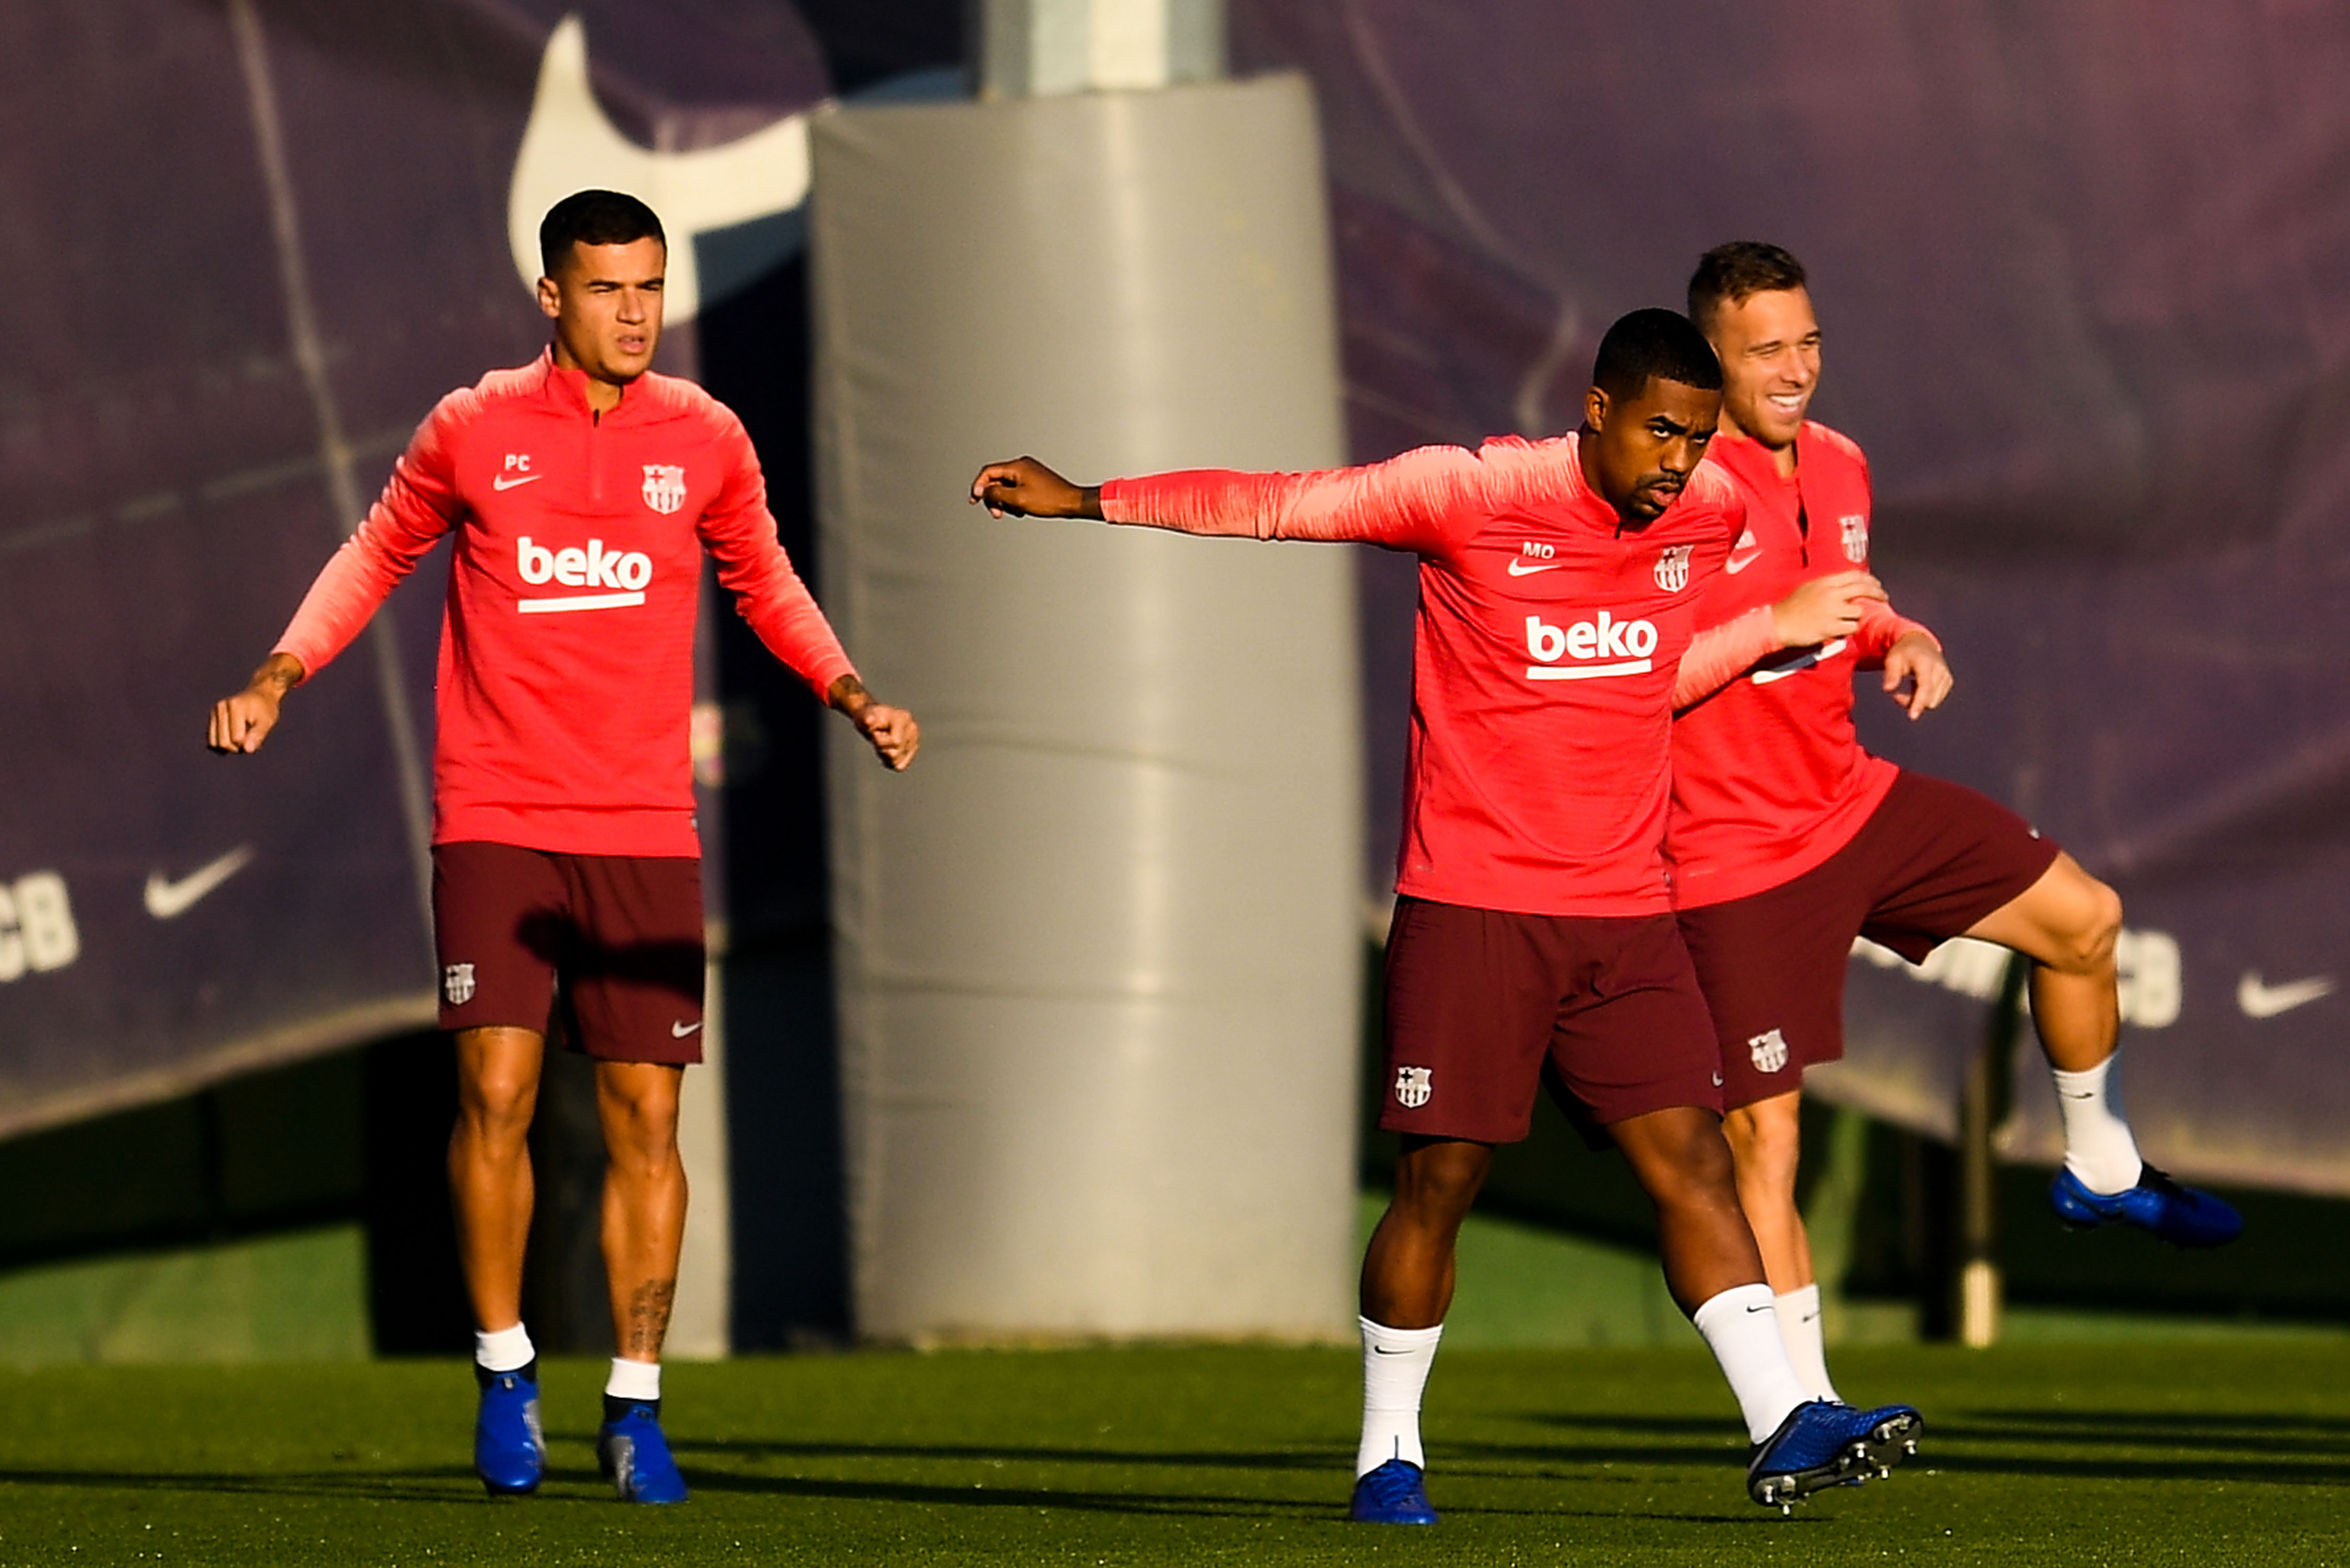 SANT JOAN DESPI, SPAIN - OCTOBER 23:  (L-R) Philippe Coutinho, Malcom and Arthur of FC Barcelona warm up during a training session ahead of the UEFA Champions League Group B match between FC Barcelona and FC Internazionale at Ciutat Esportiva Joan Gamper on October 23, 2018 in Sant Joan Despi, Spain.  (Photo by David Ramos/Getty Images)